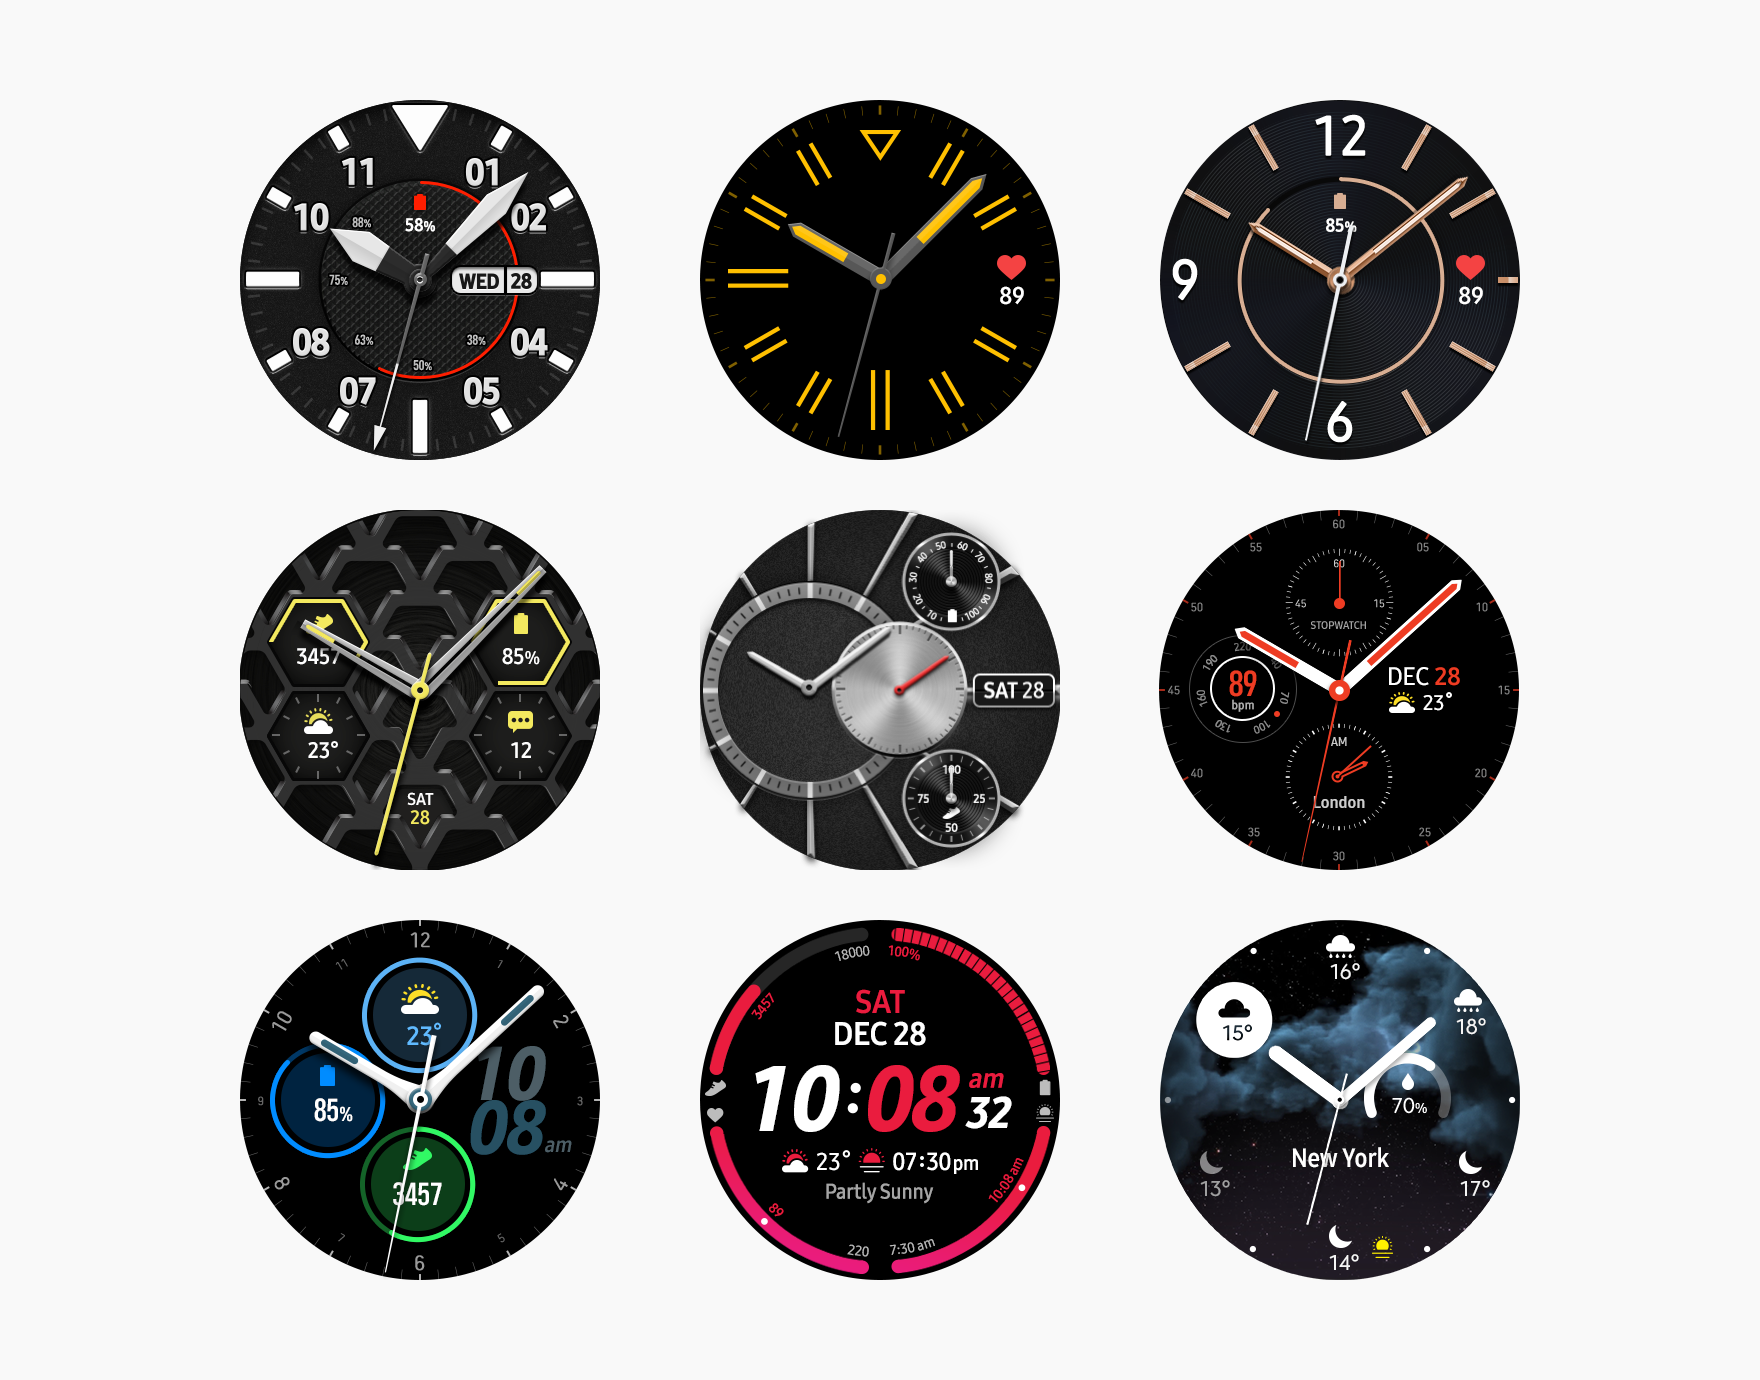 The watch face not only tells time but also provides useful functions and works as a fashion accessory.